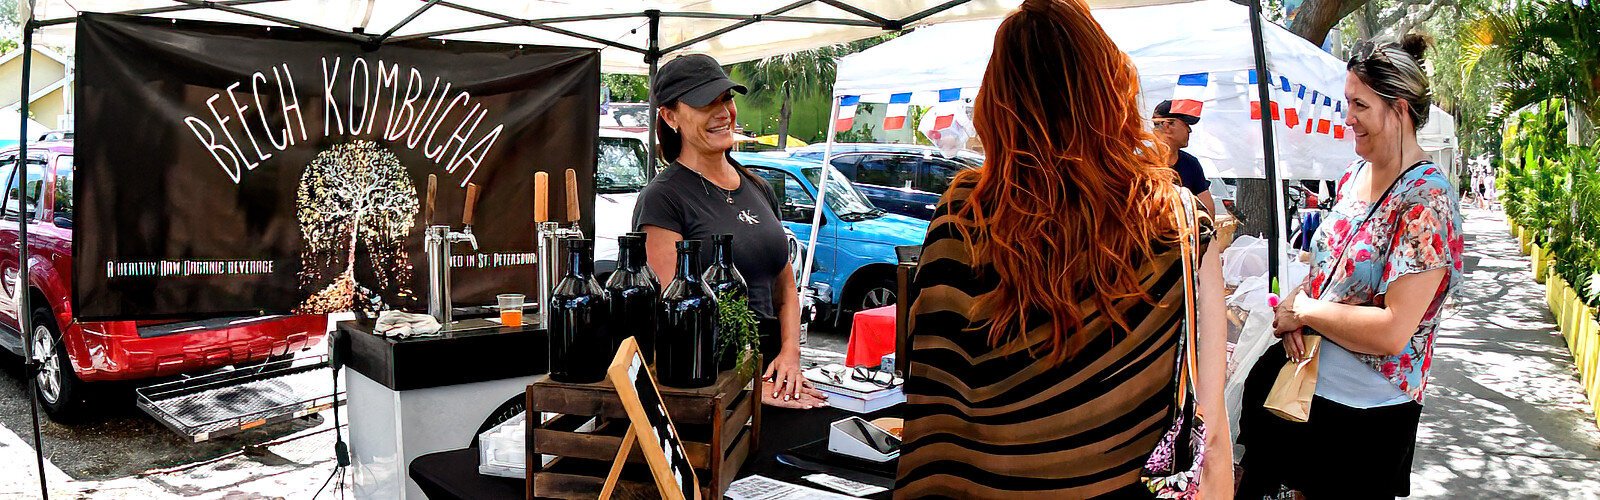 Beech Kombucha, of St Pete, is part of the weekly Gulfport Tuesday Fresh Market, selling and offering samples of traditionally brewed kombucha with unique flavor blends.